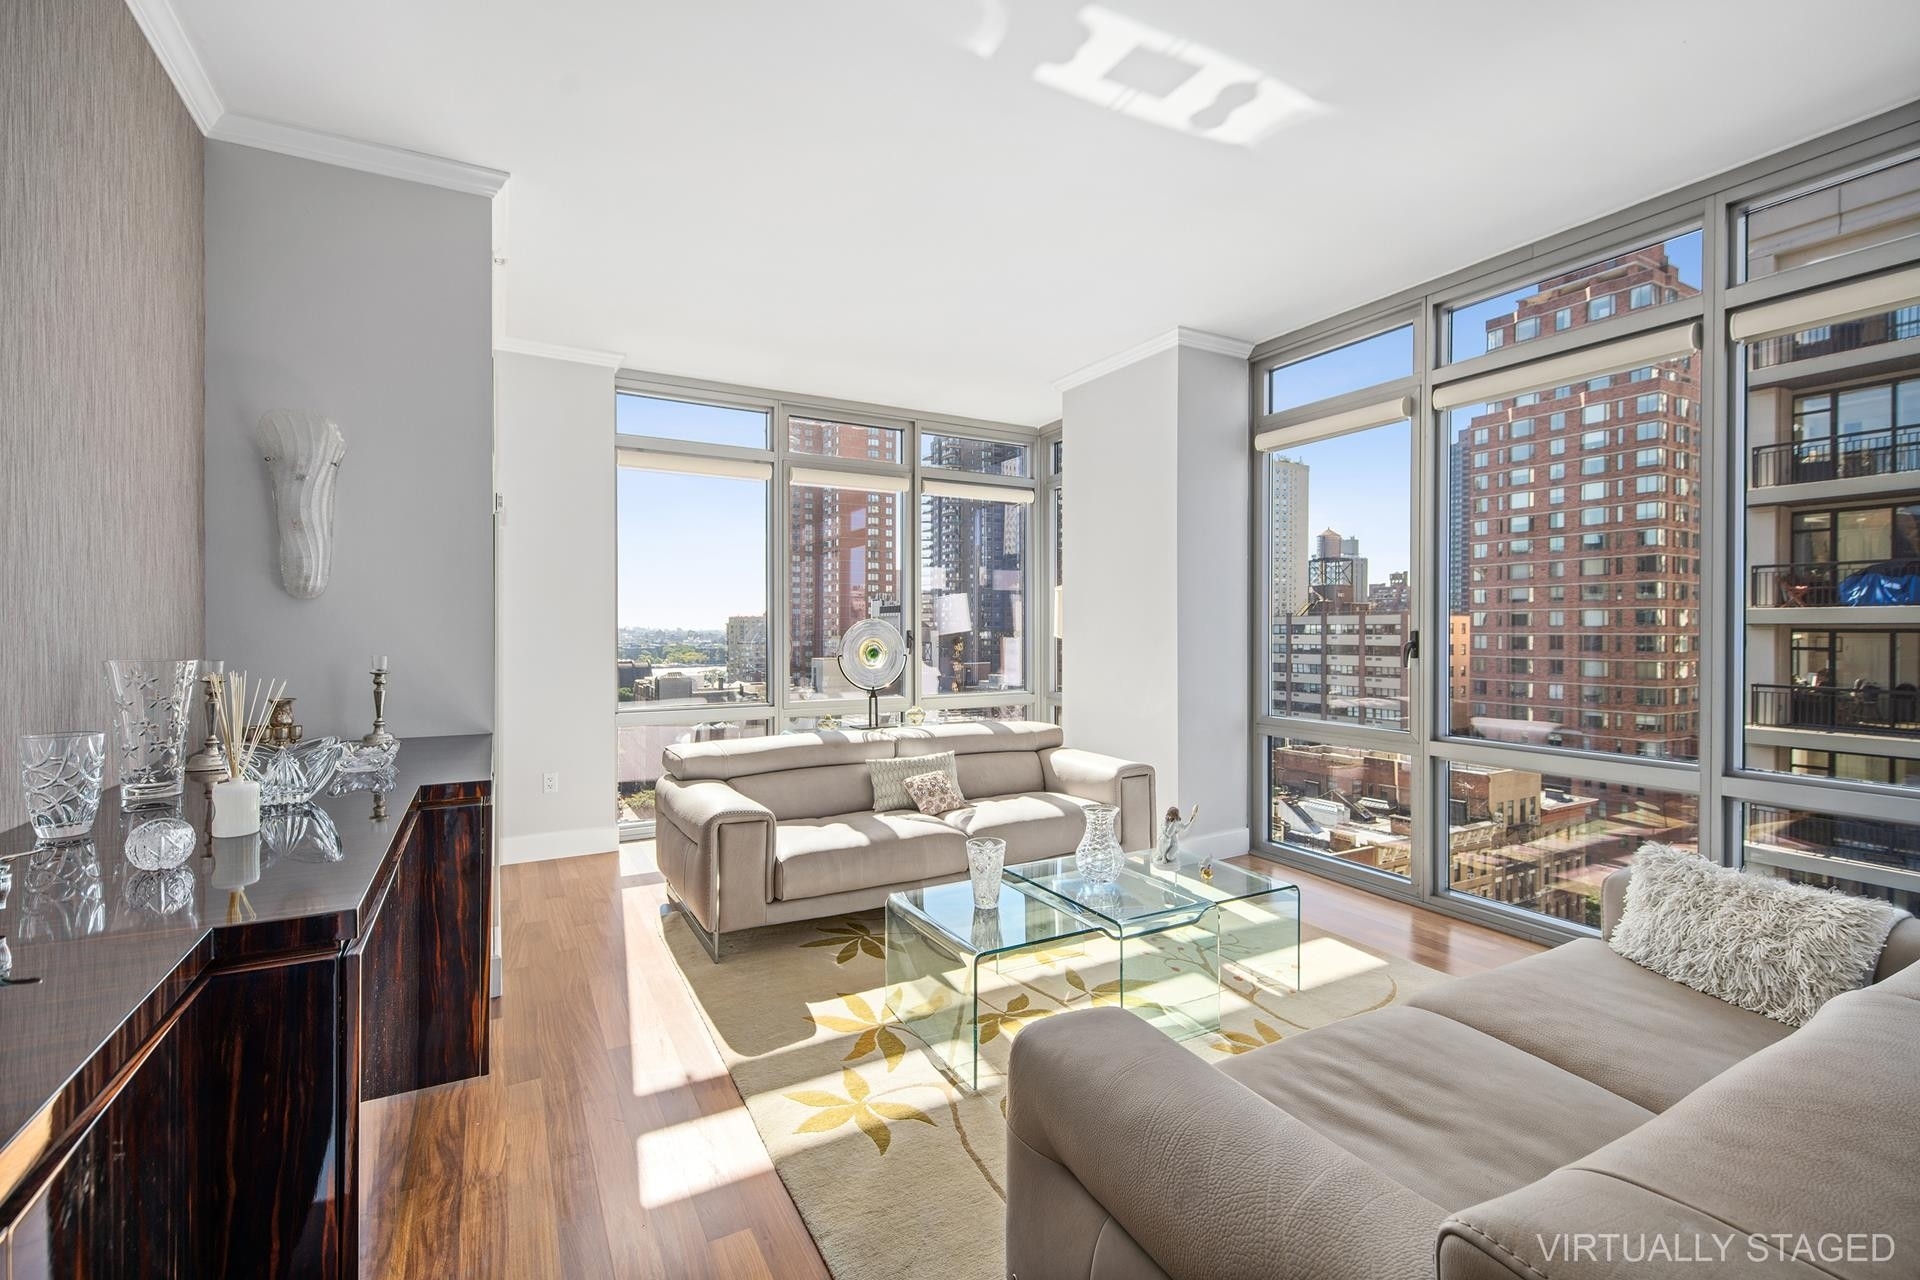 Co-op / Condo for Sale at Azure, 333 E 91ST ST, 12CD Yorkville, New York, New York 10128